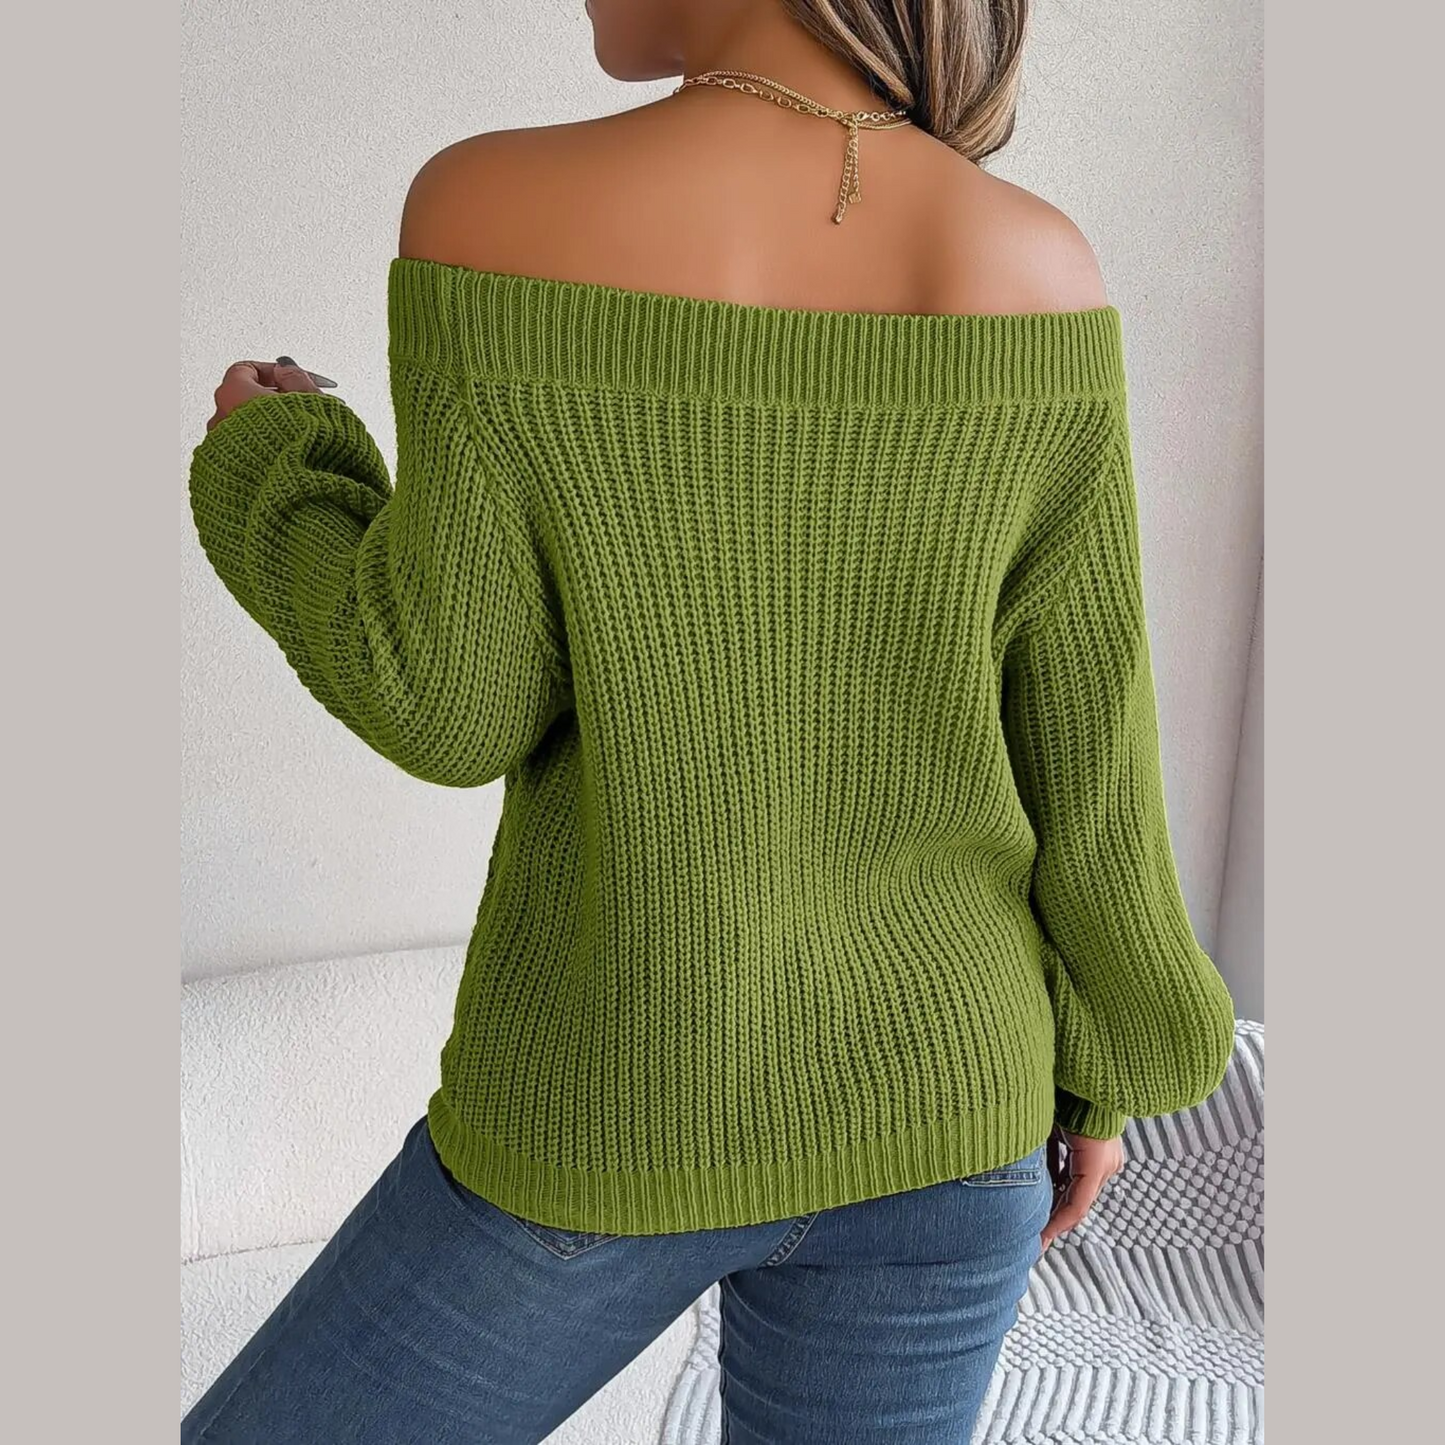 Loni - Green Knitted Off The Shoulder Sweater Top